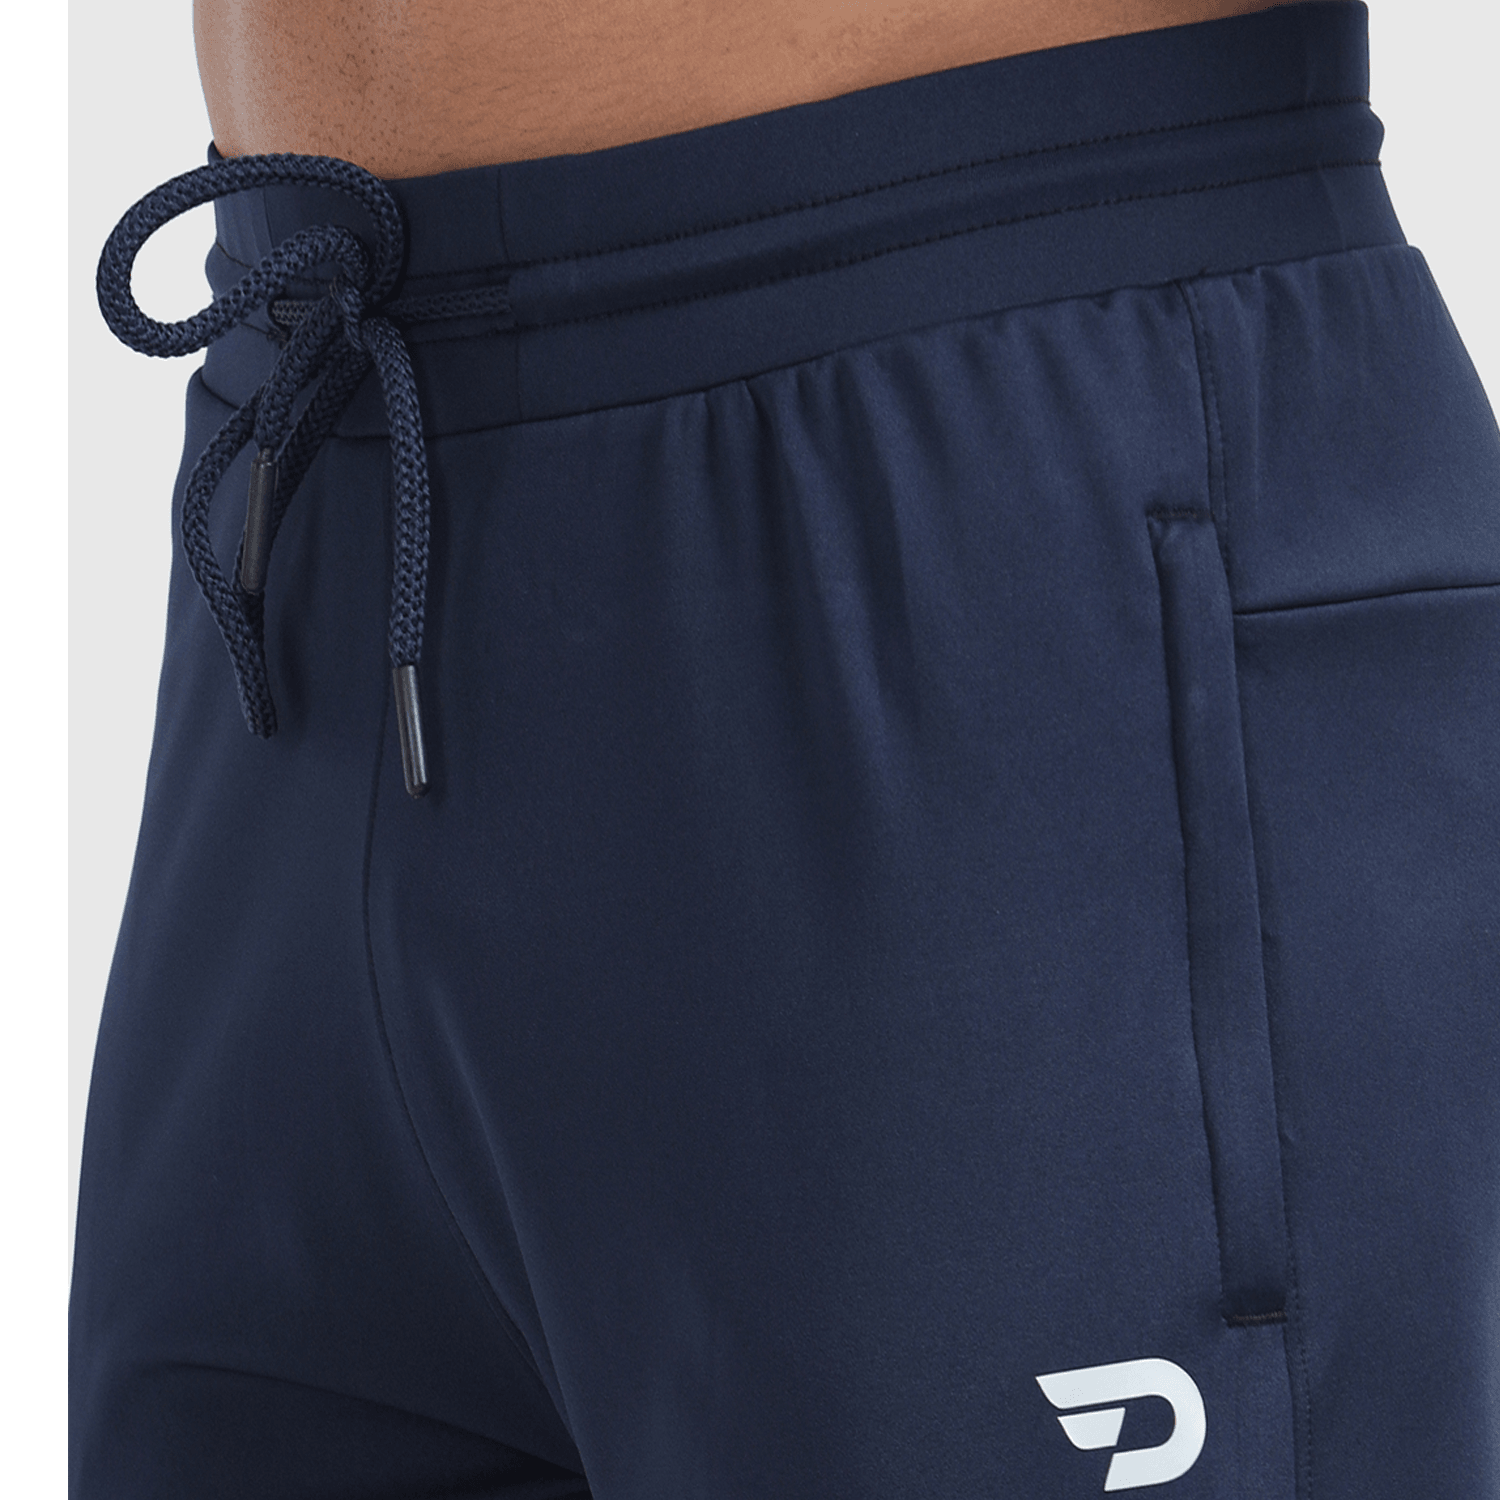 Denmonk: Elevate your look with these Powerjoggers sharp midnight navy joggers for mens.